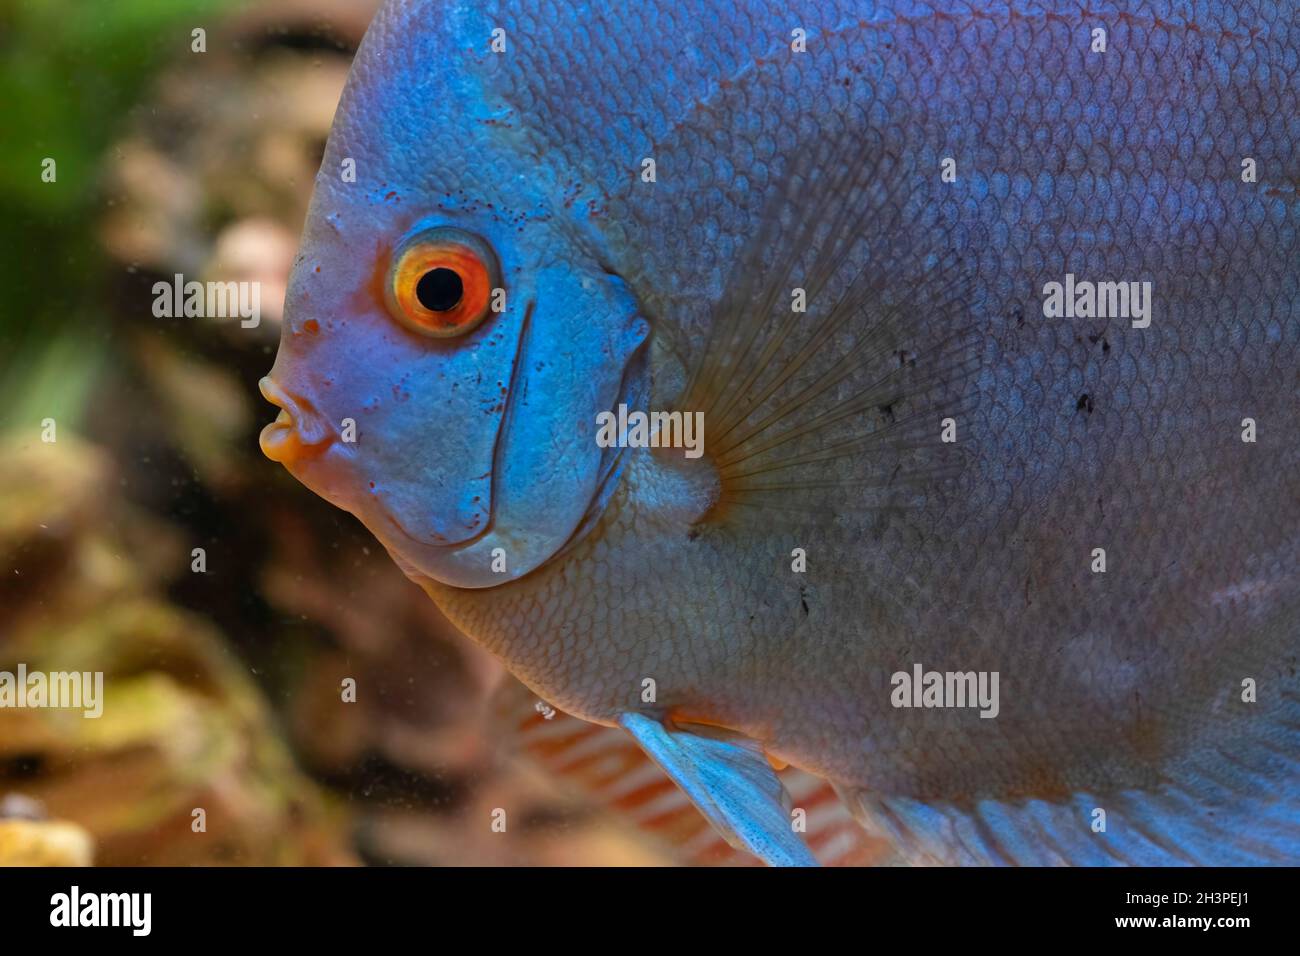 Blue fish from the spieces Symphysodon discus in aquarium. Freshwater aquaria concept Stock Photo